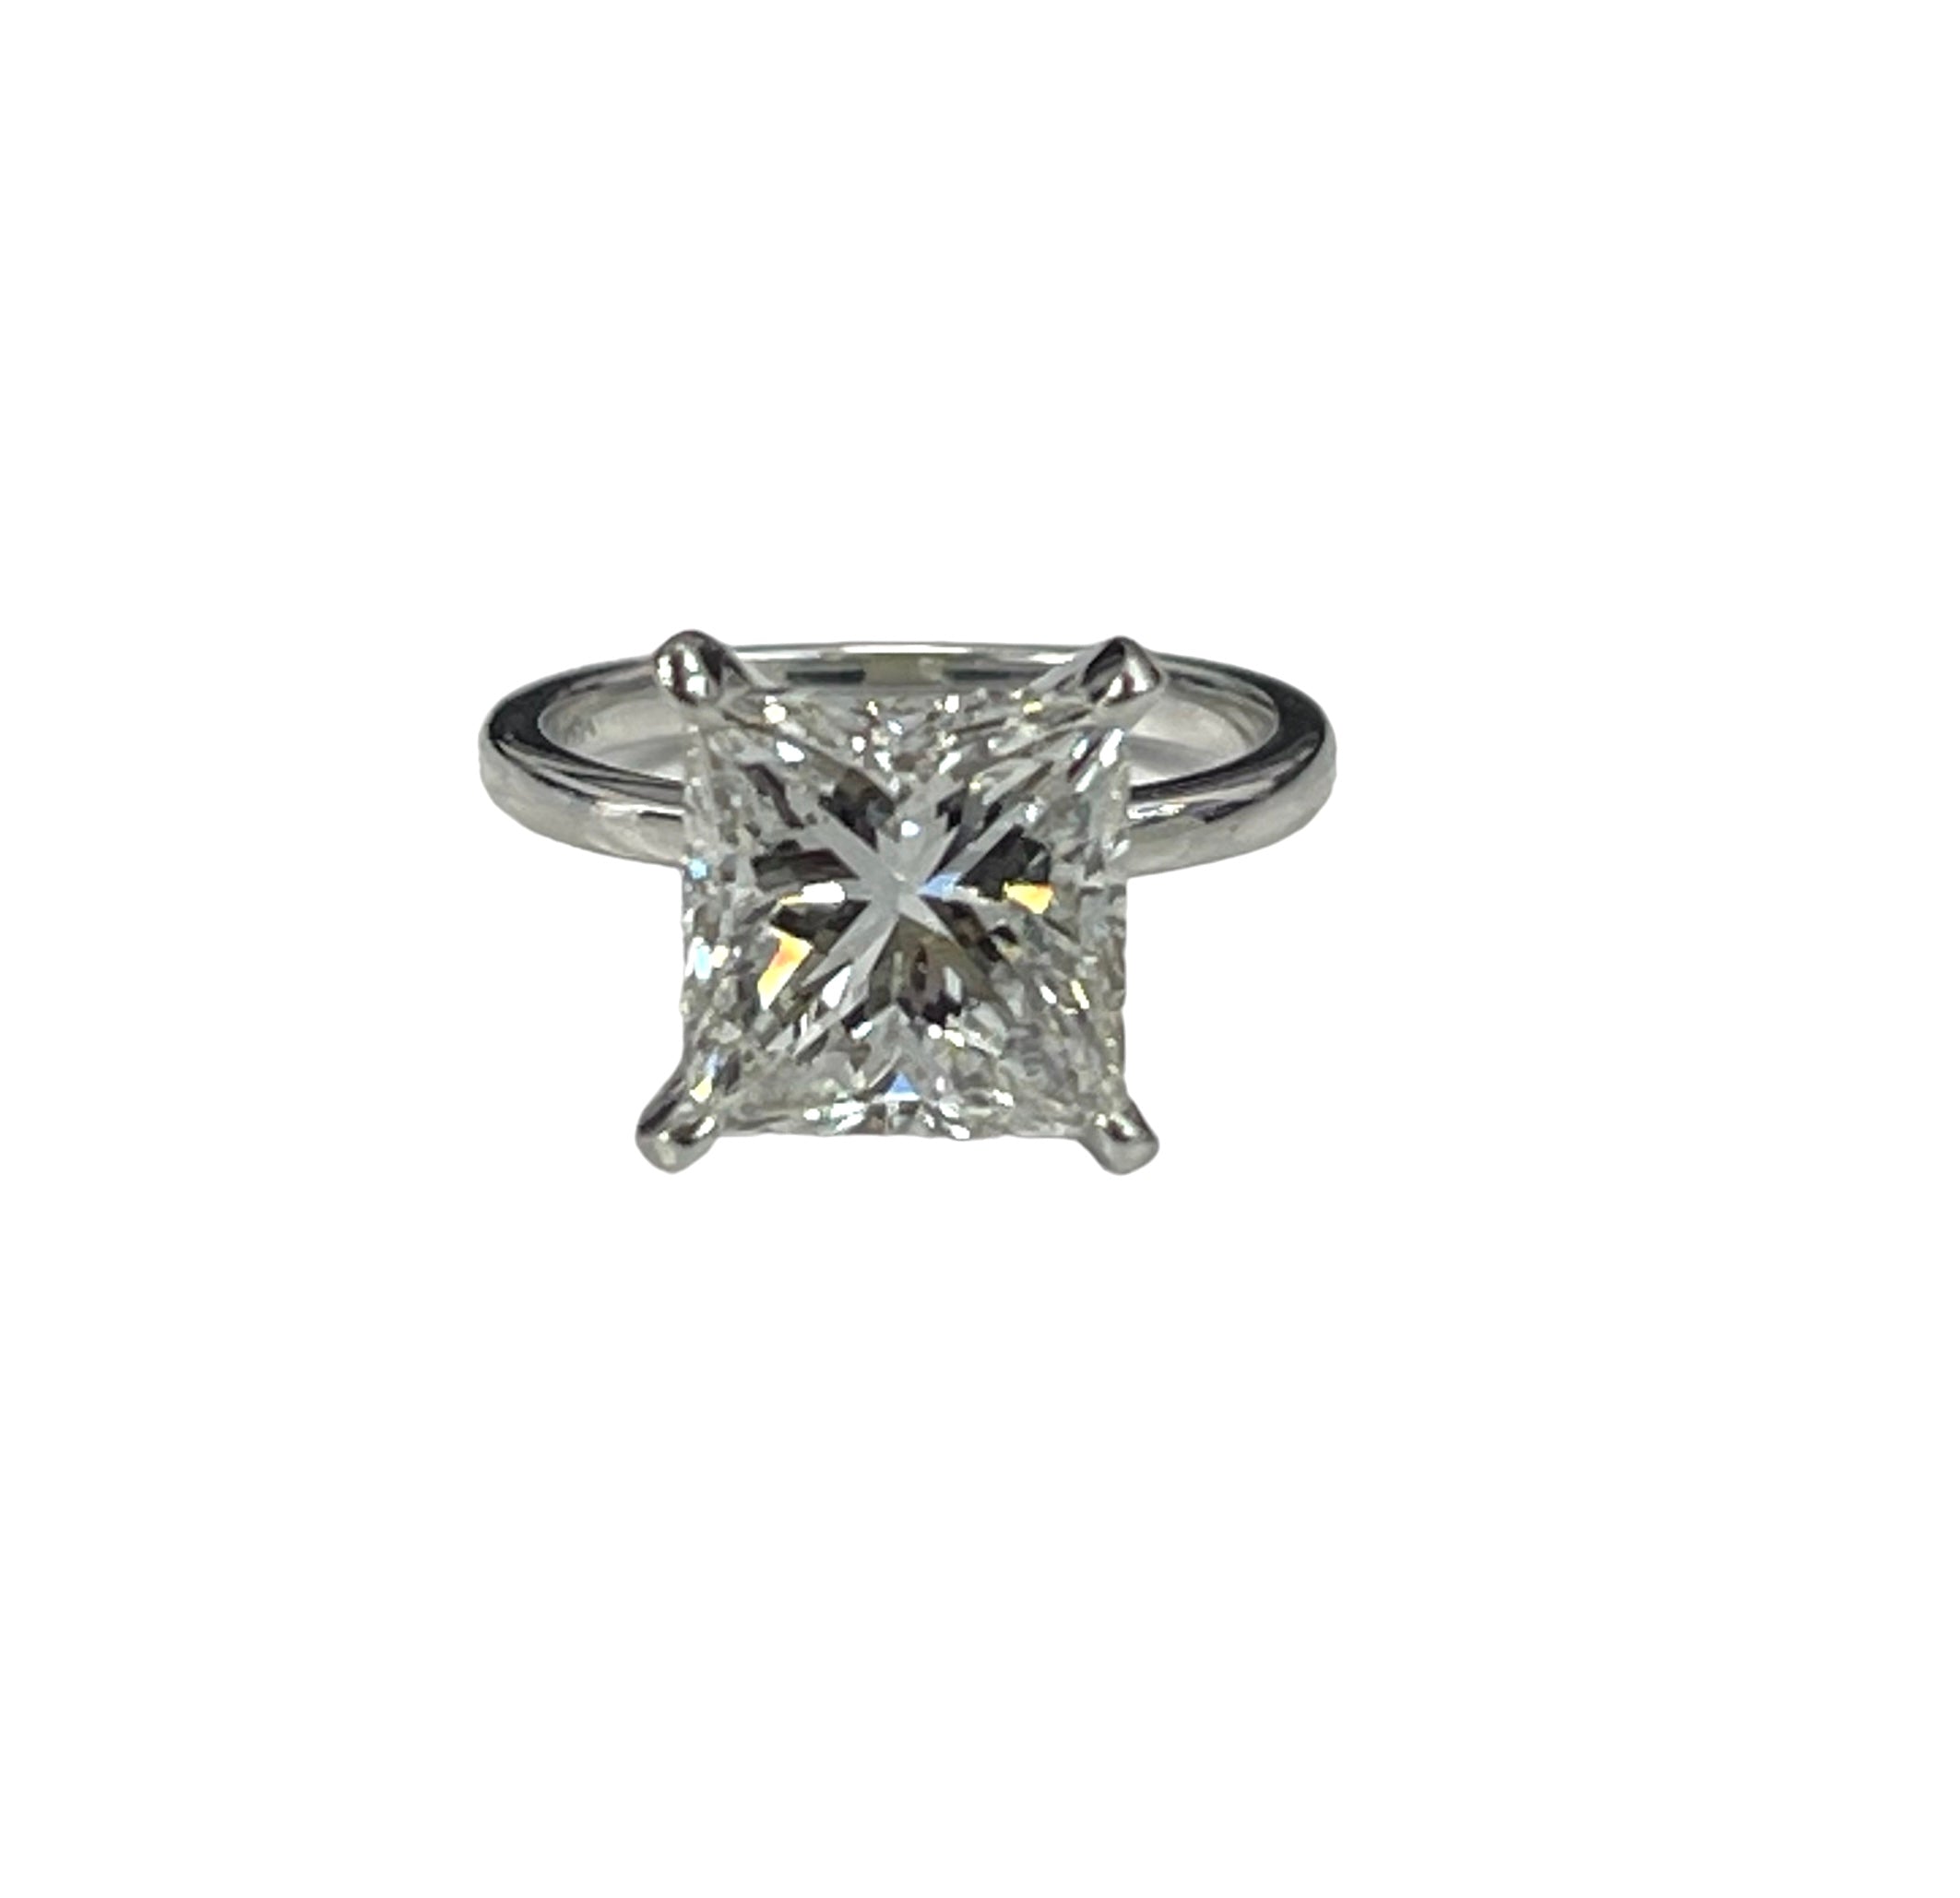 Princess Cut Solitaire Diamond Ring GIA Certified 4.0 Carats F-SI2